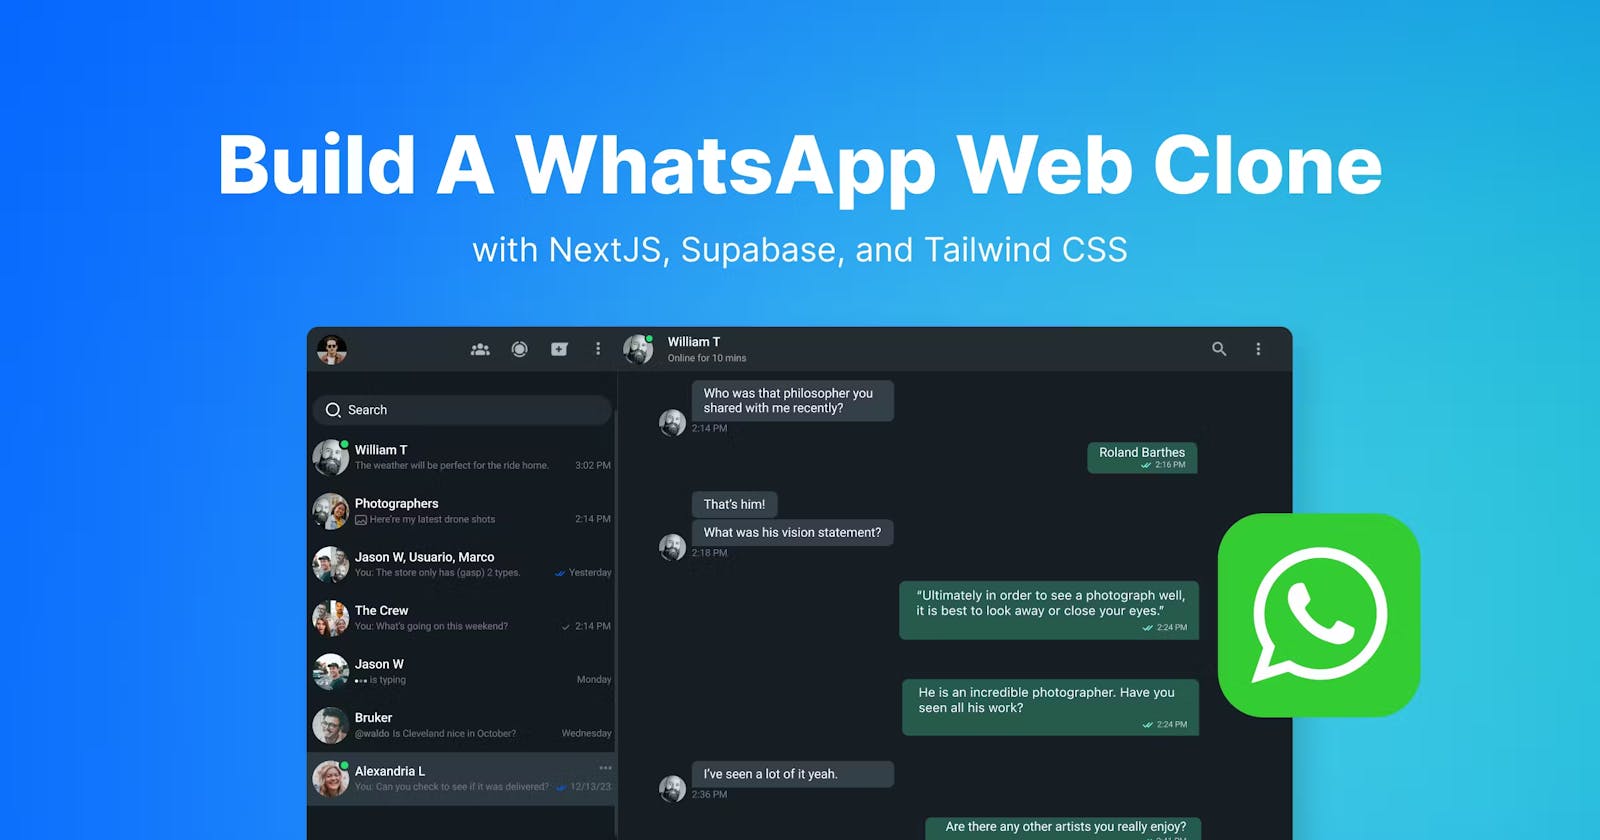 Building a Real-Time WhatsApp Web Clone with NextJS, Supabase, and Tailwind